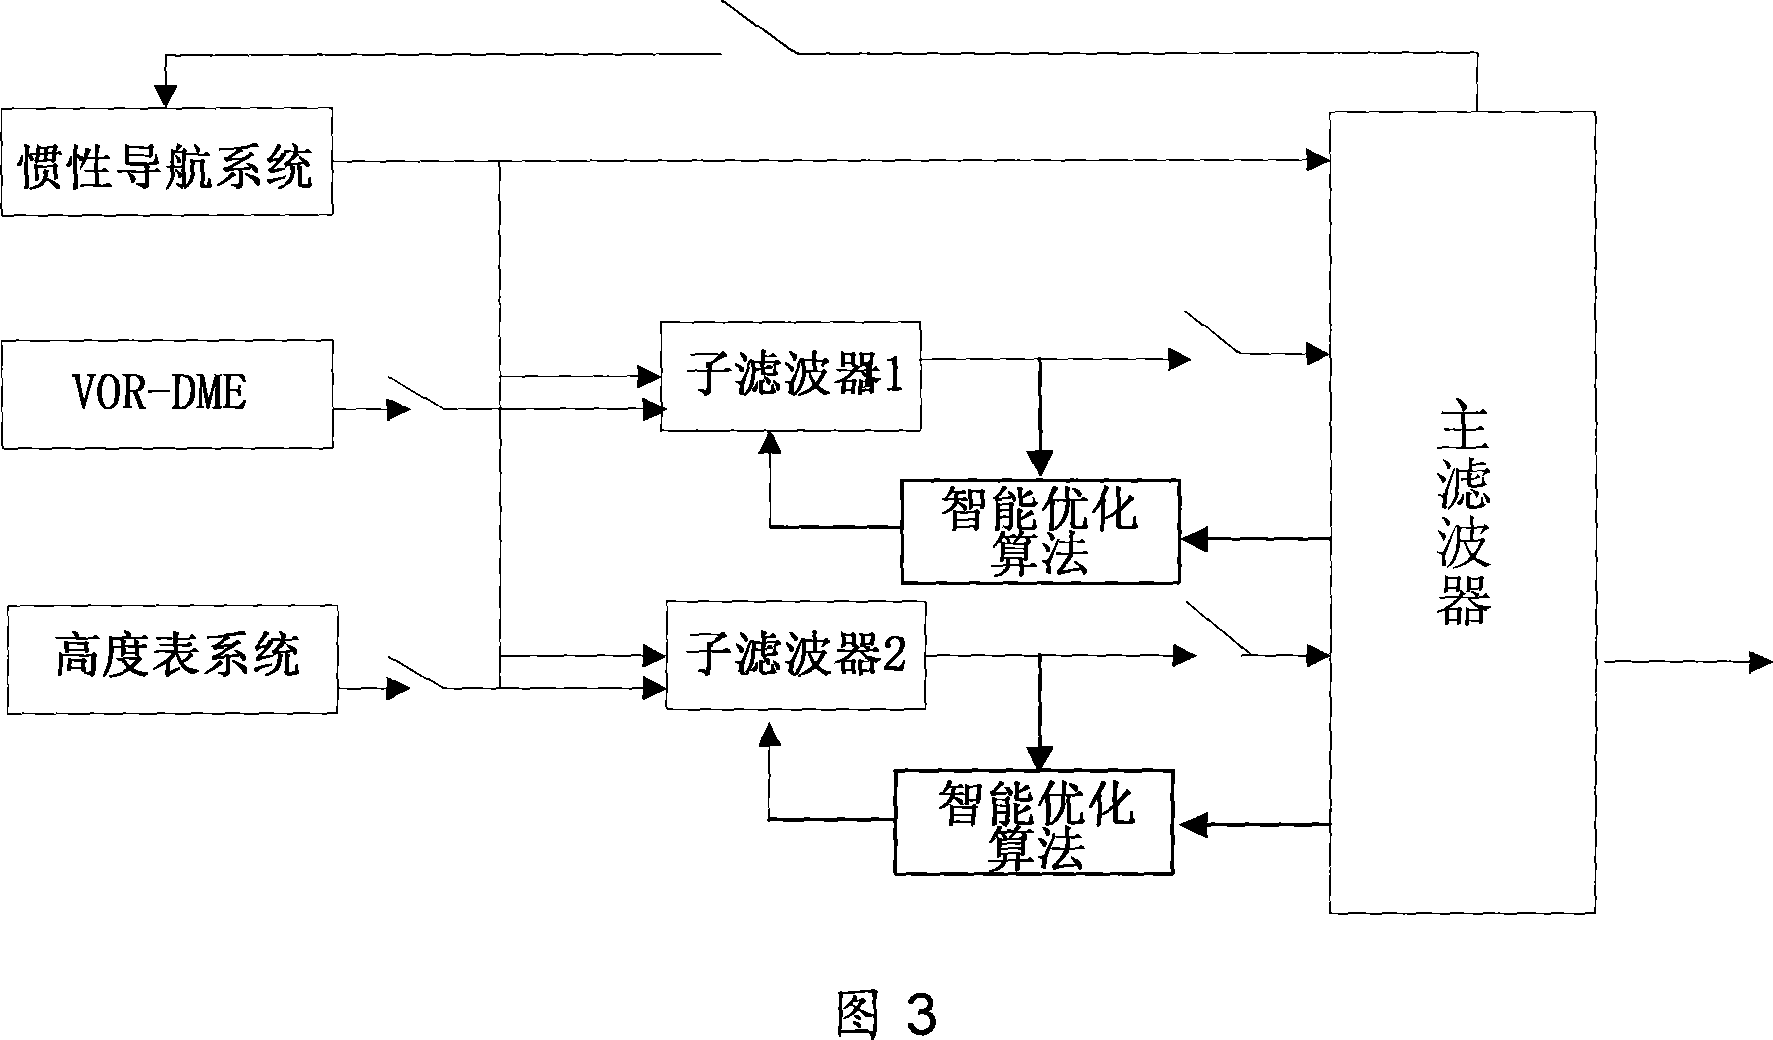 Method of realizing combined navigation system structure for aviation